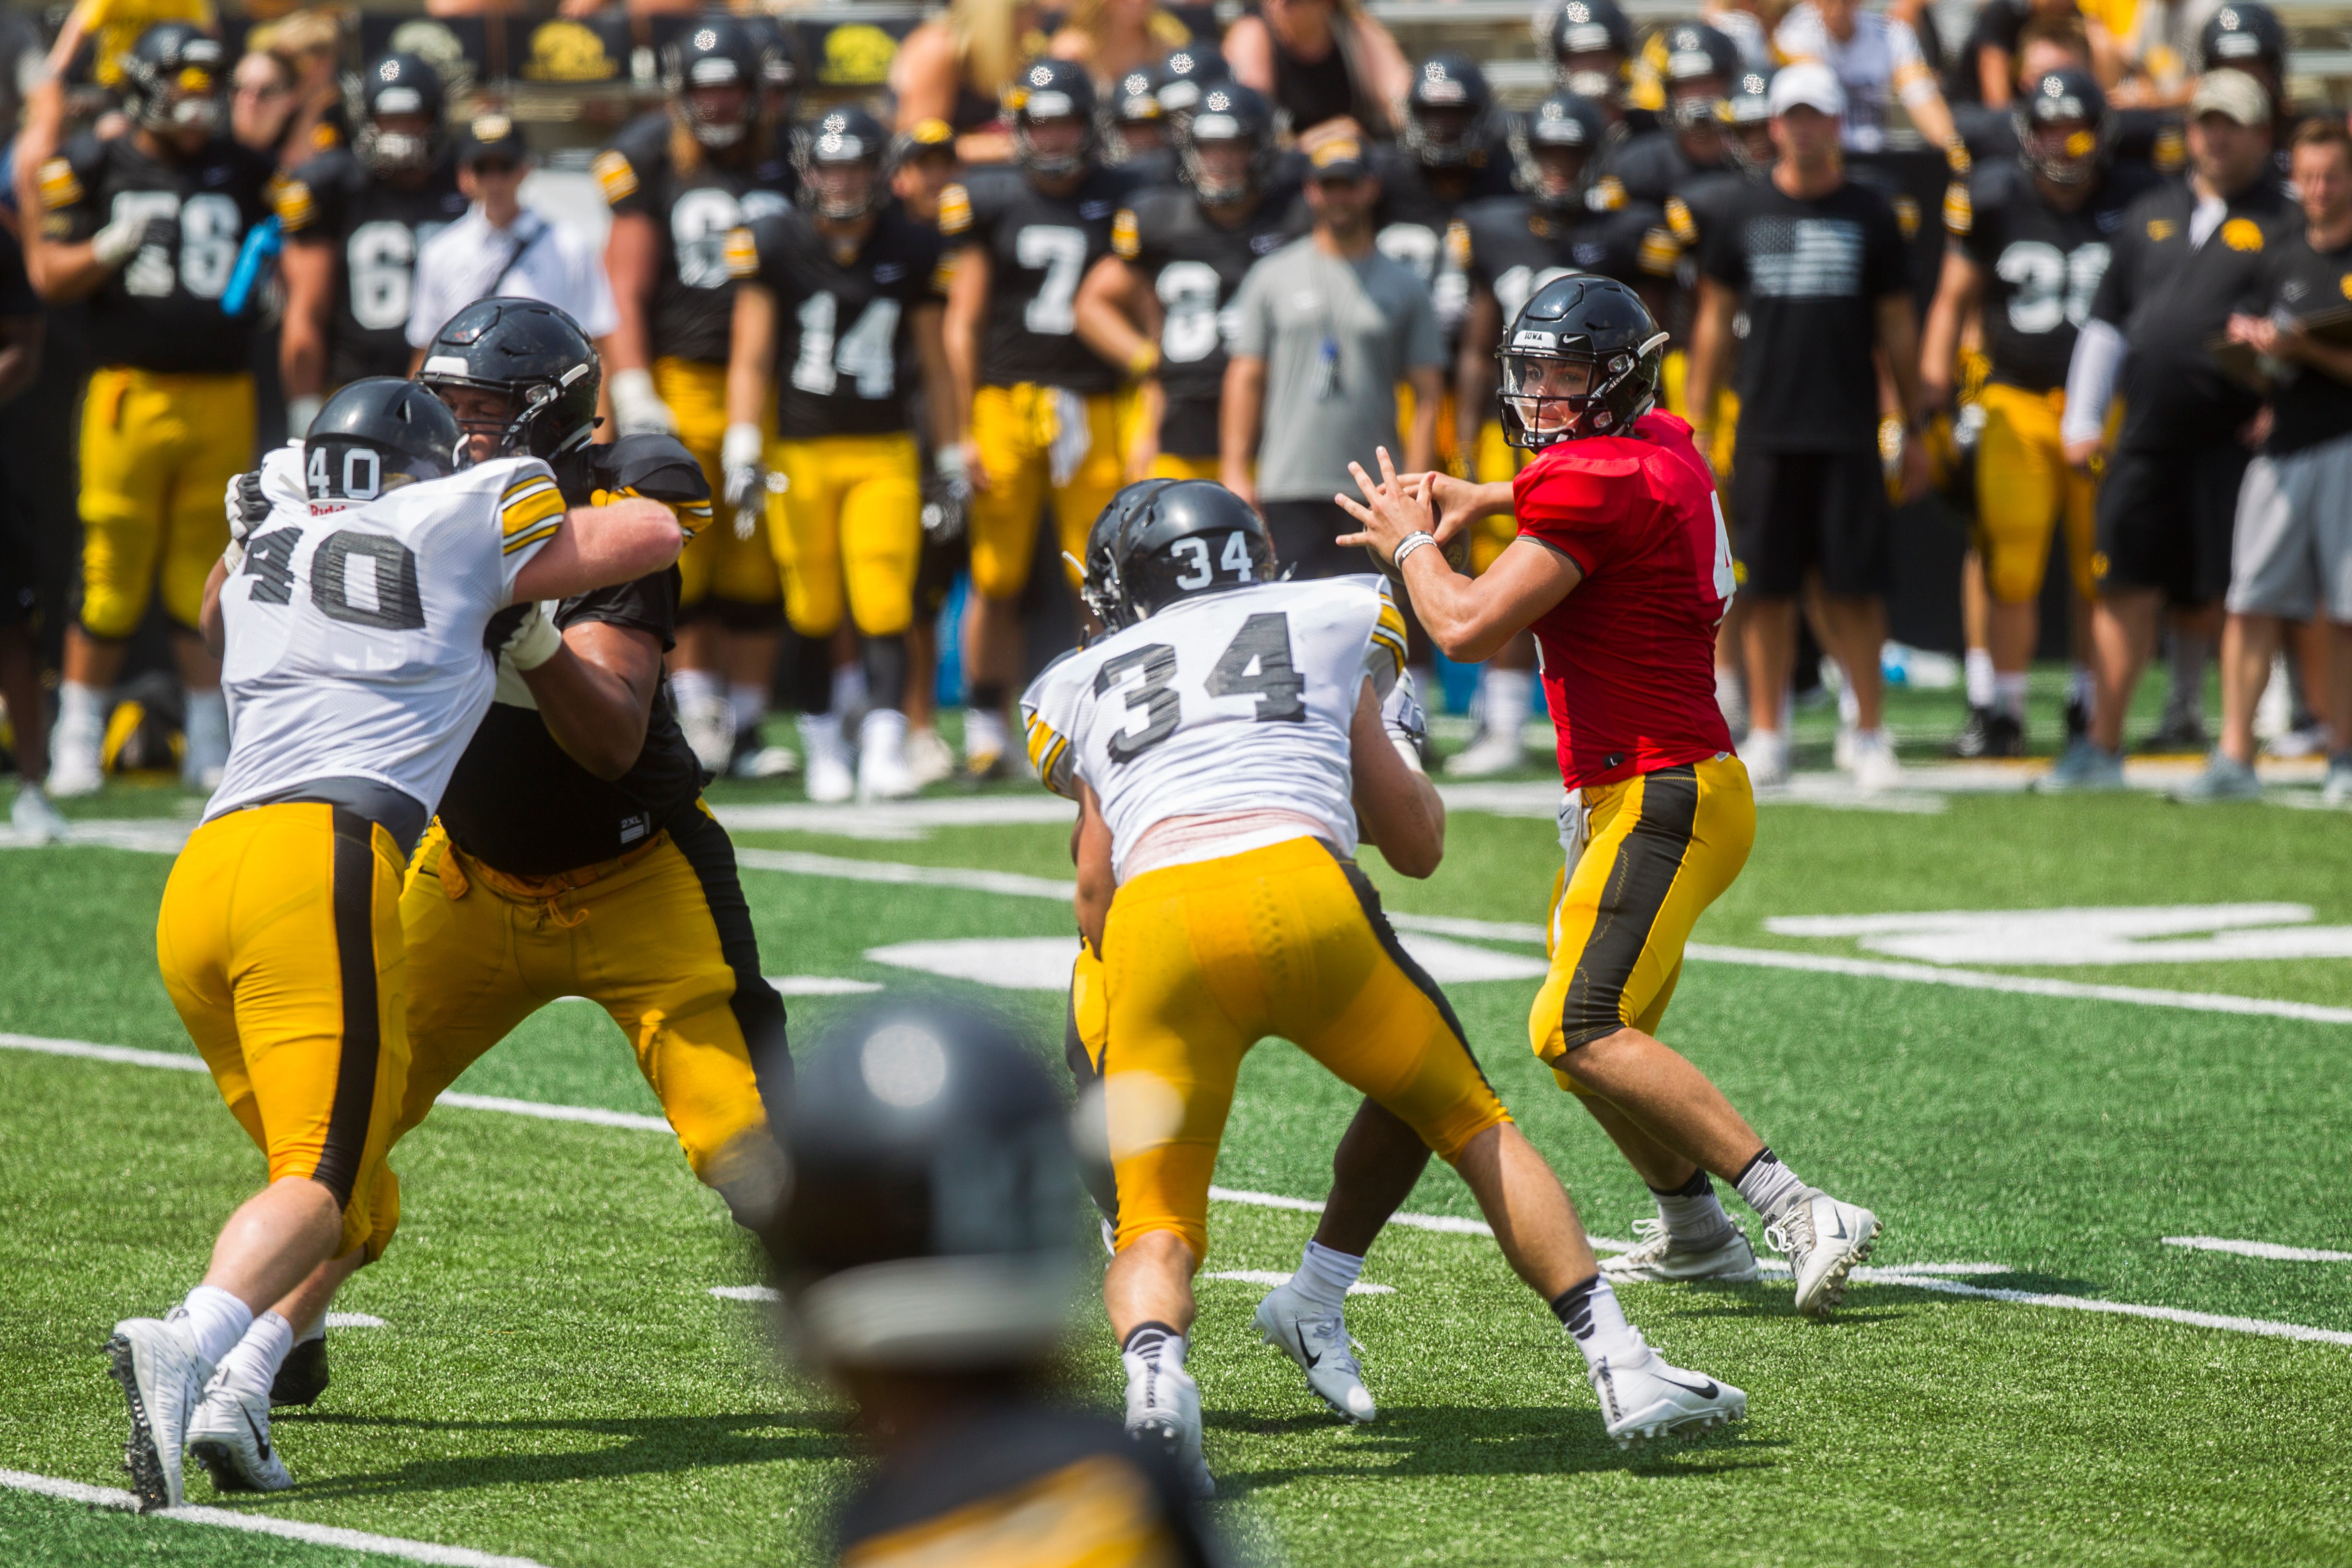 Iowa quarterback Nate Stanley looks to get a ball out while Iowa defensive end Parker Hesse and linebacker Kristian Welch try to get past blocks during a Kids Day practice on Saturday, Aug. 11, 2018, at Kinnick Stadium in Iowa City.